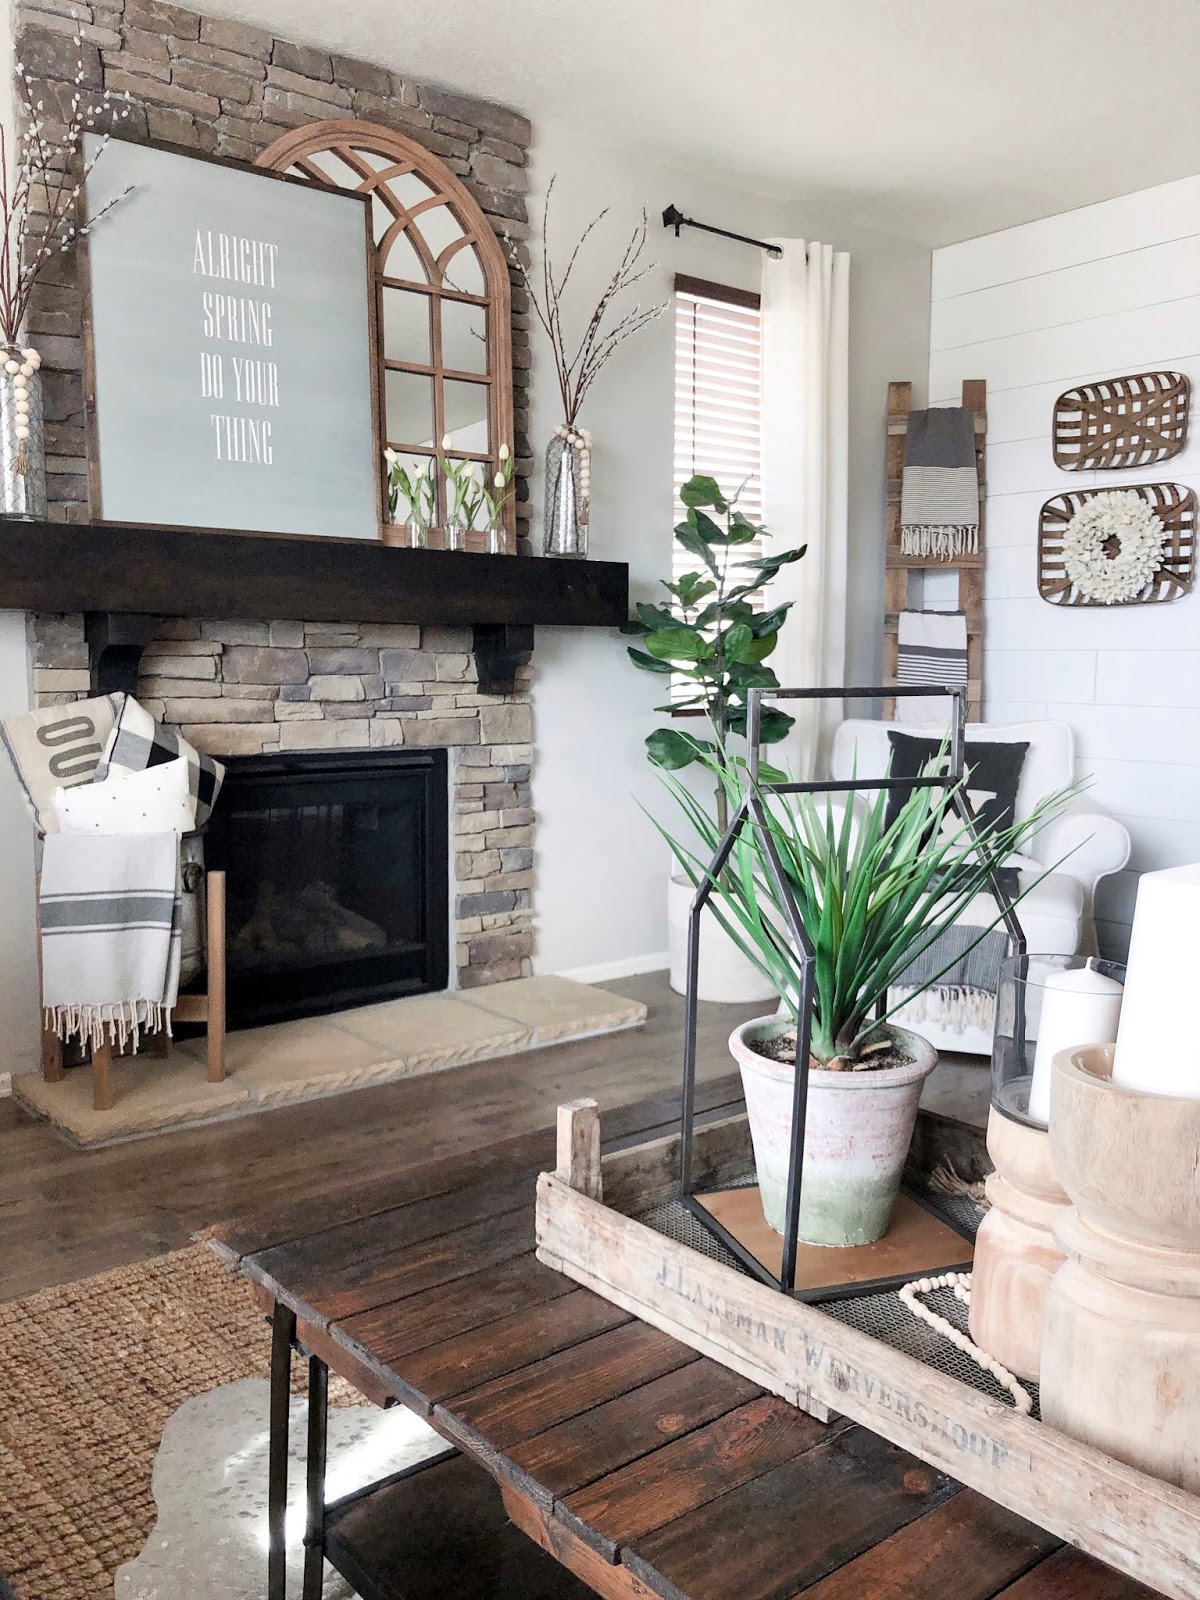 Spring farmhouse styled fireplace, arched mirror, large sign that says "Alright Spring do your thing" white tulips, glass vases 